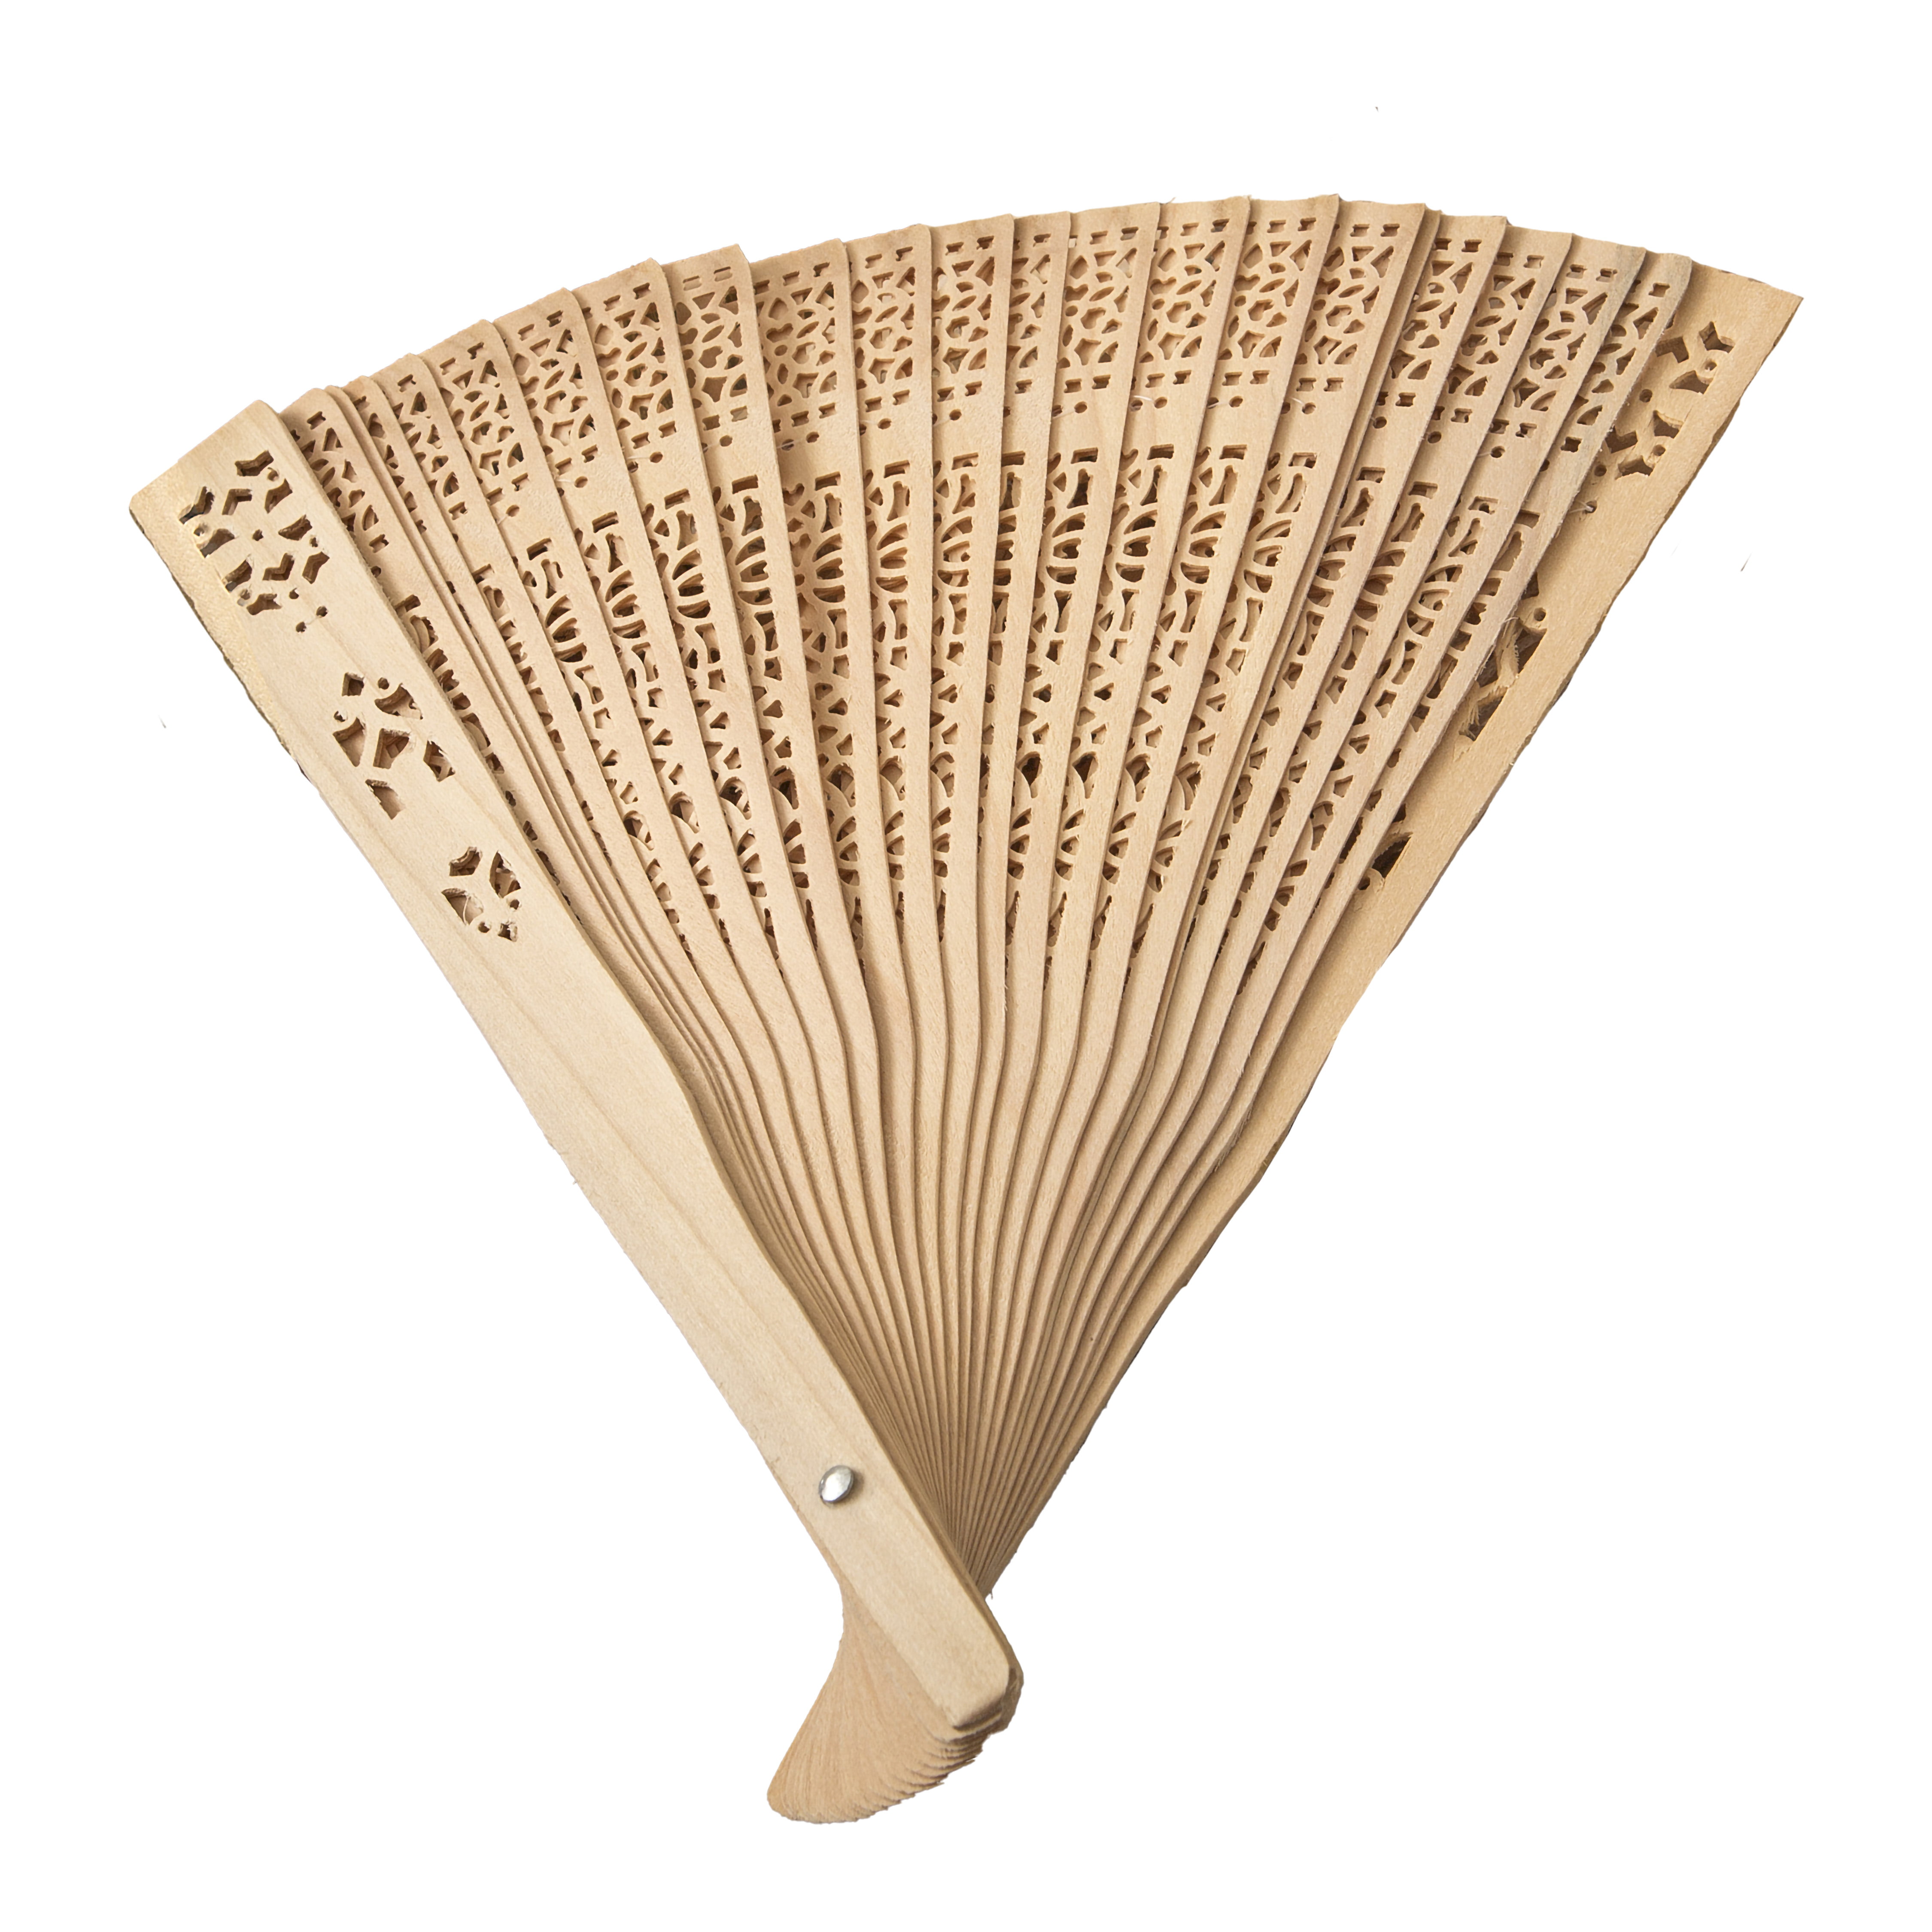 Home Gifts J MAMaiuh Chinese Sandalwood Fan Scented Wooden Openwork Personal Hollow Hand Held Folding Fans for Wedding Decoration Birthdays 